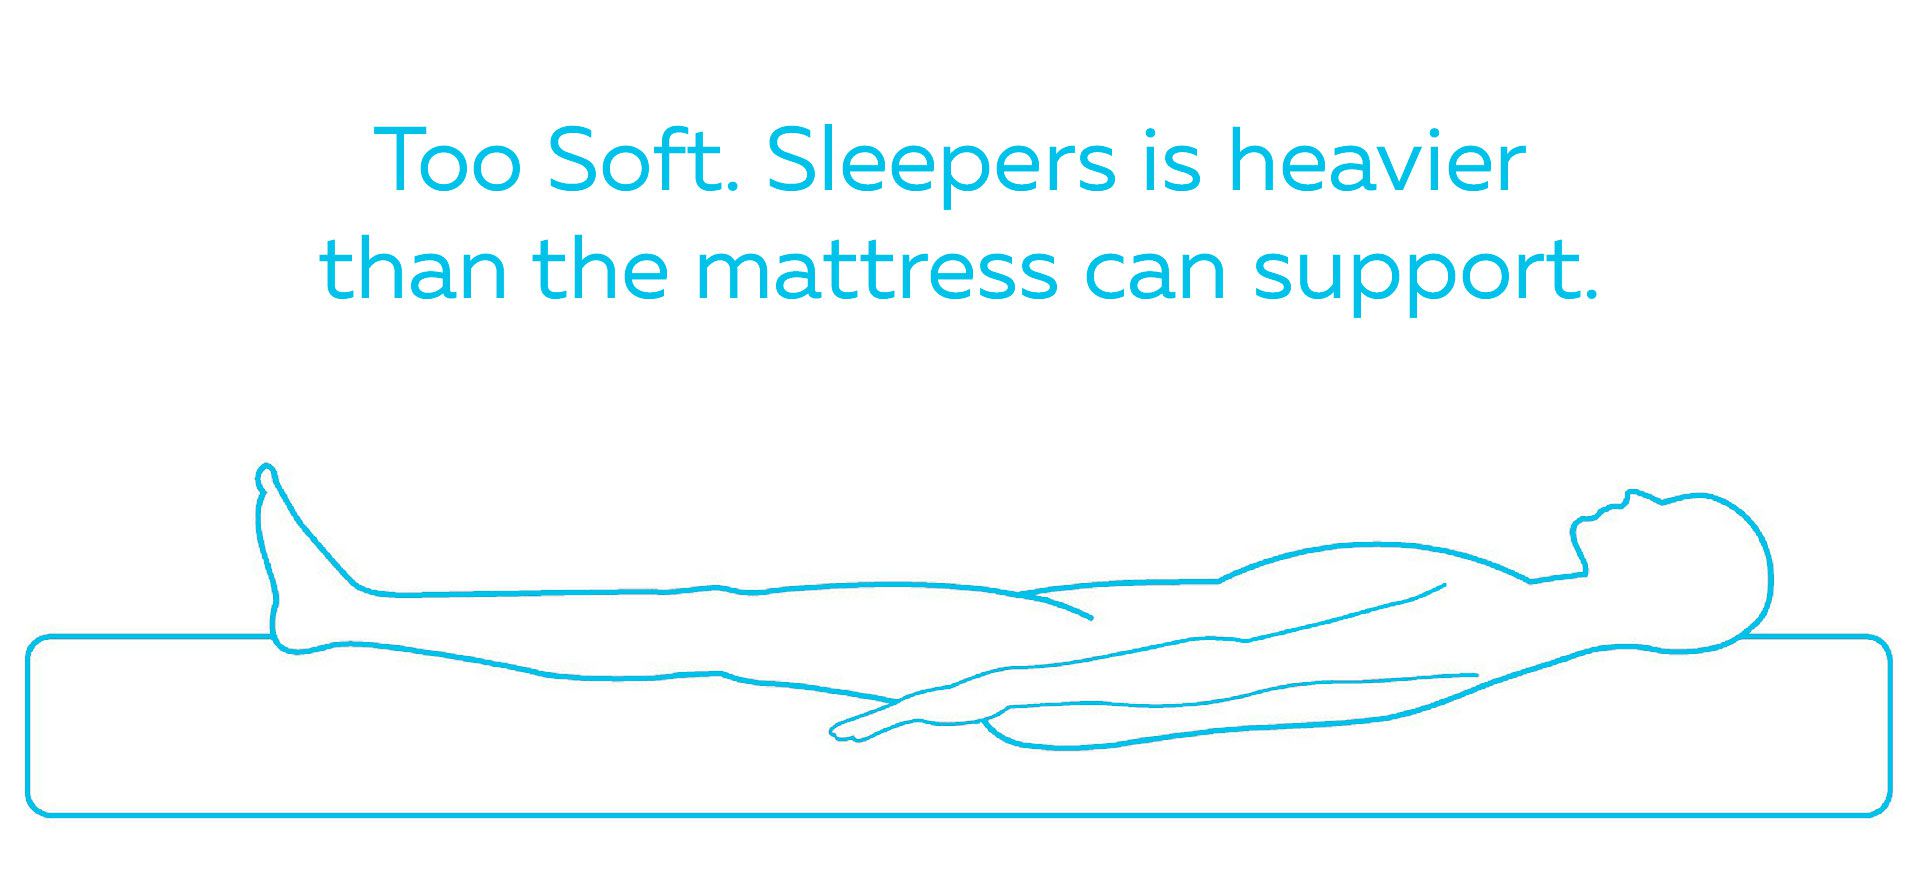 Too low level of mattress firmness for the person.